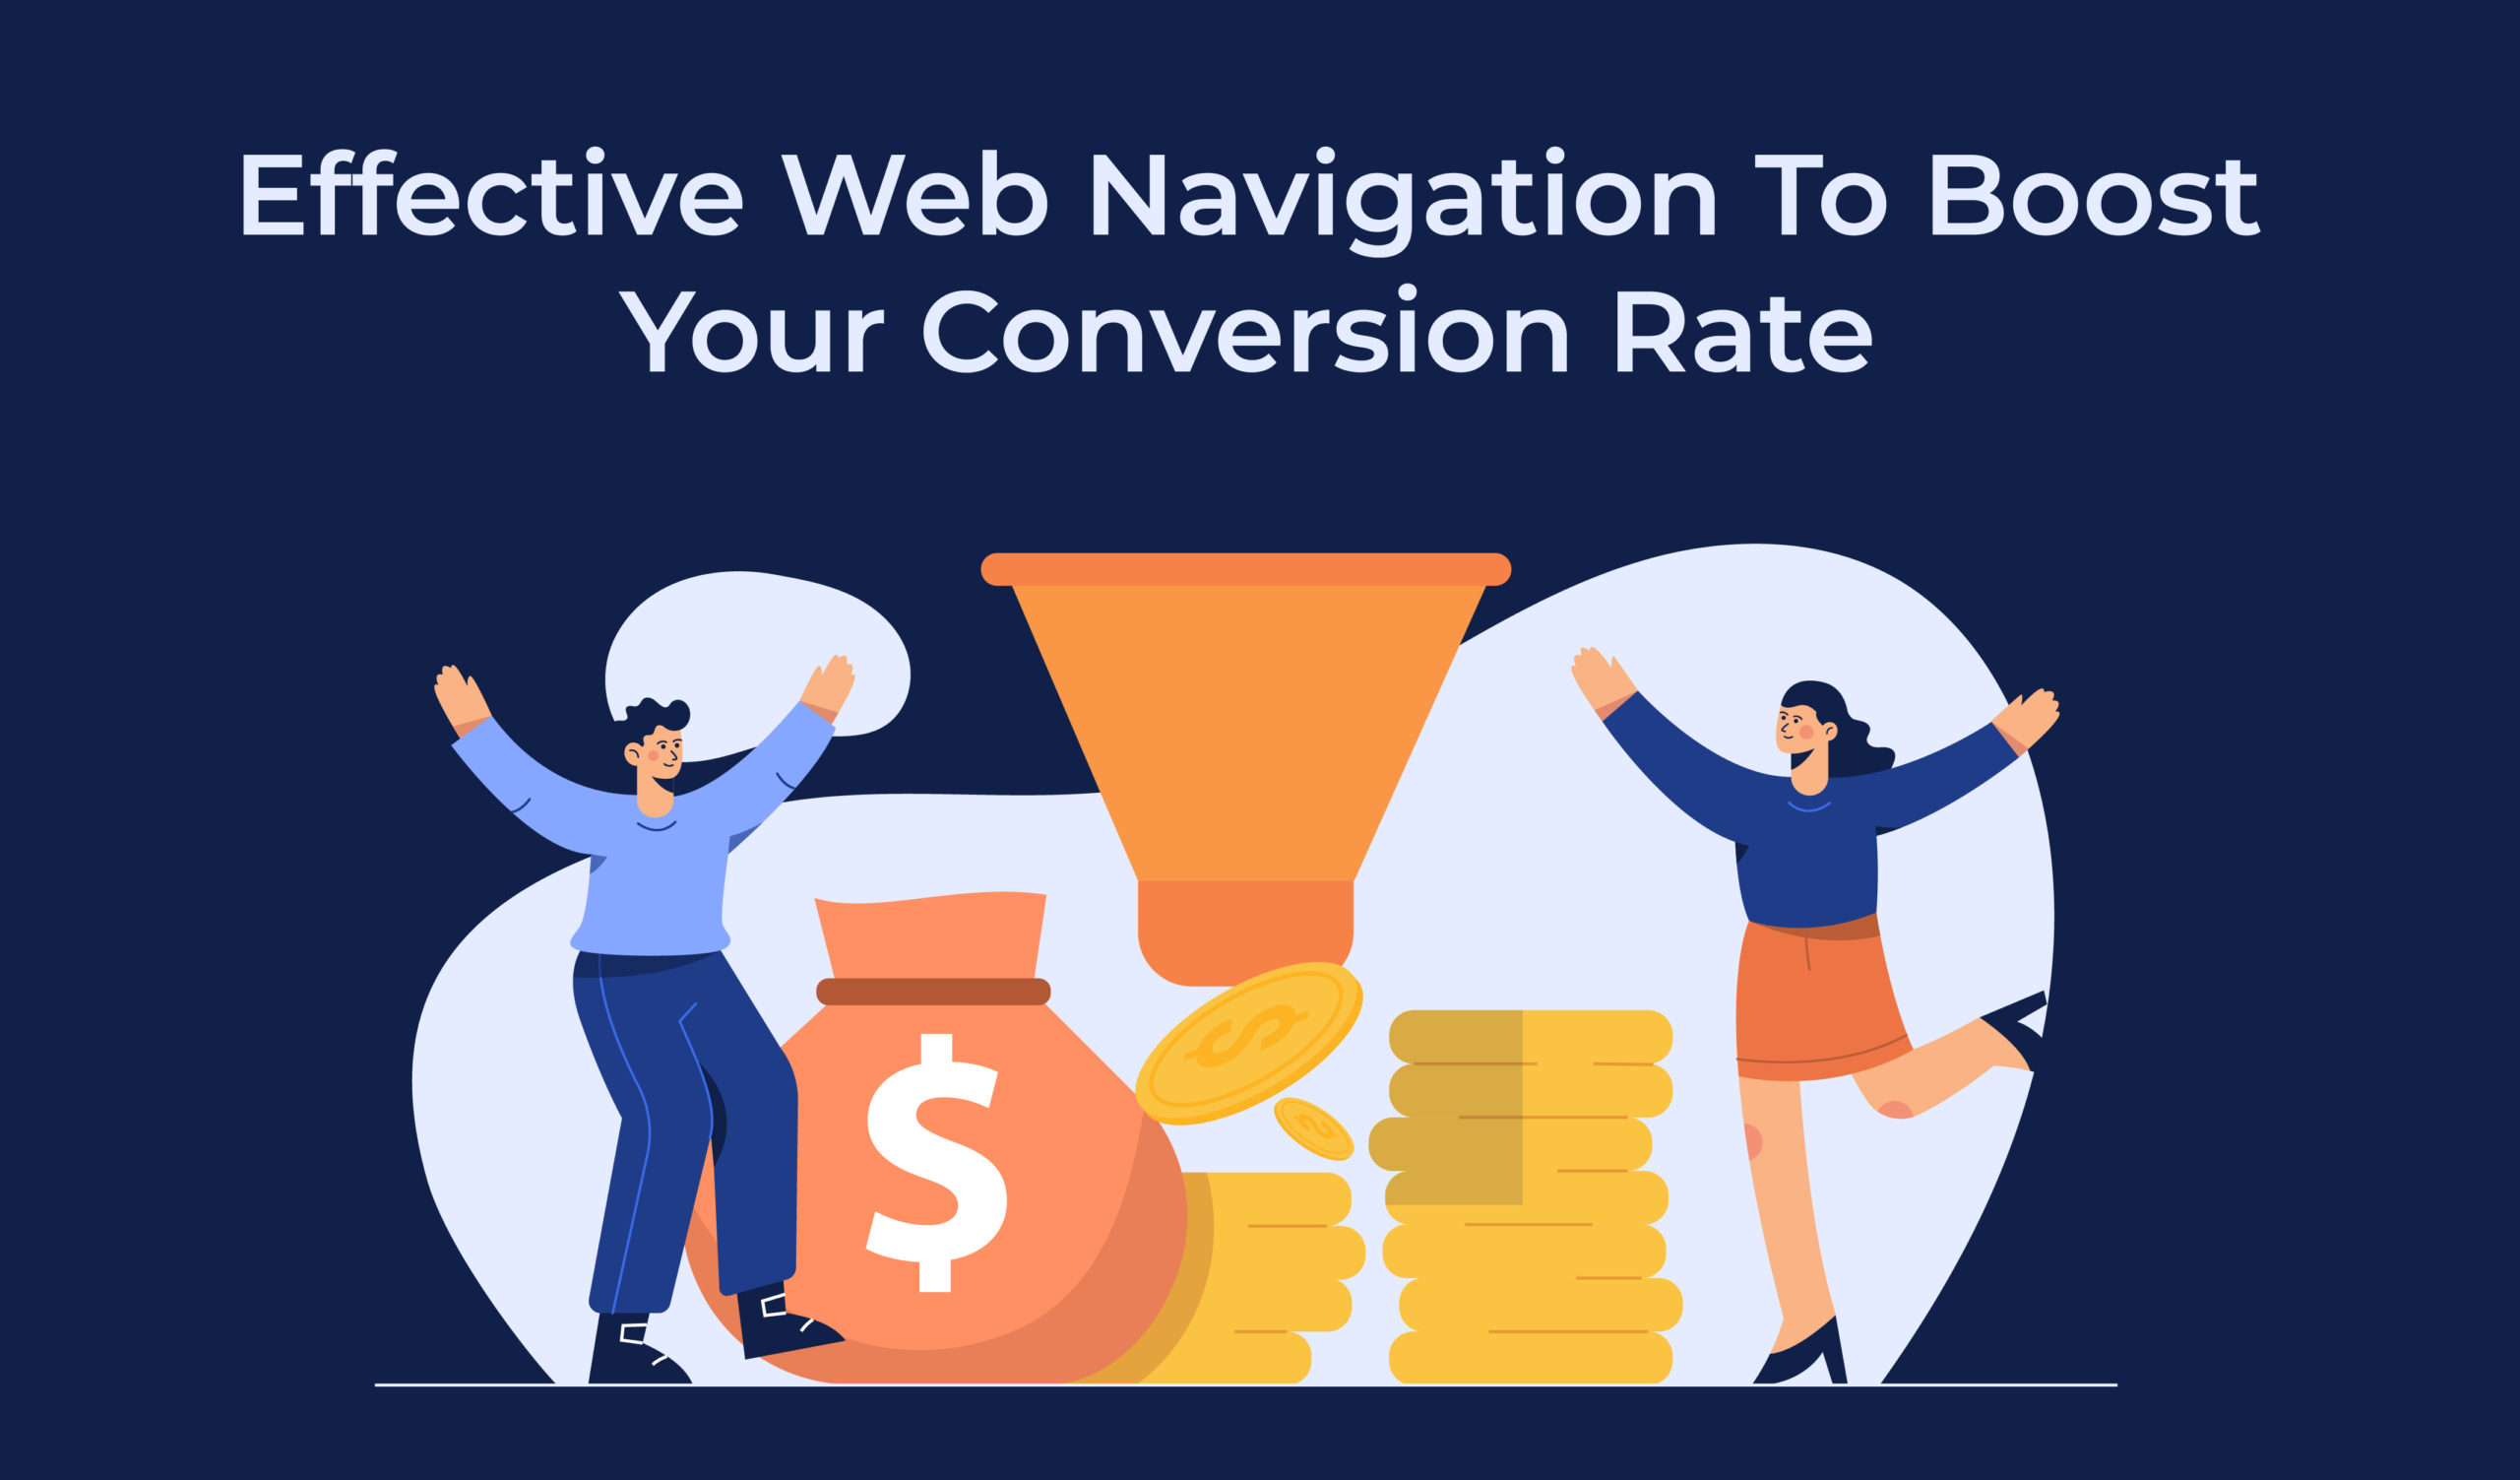 Effective Web Navigation To Boost Your Conversion Rate